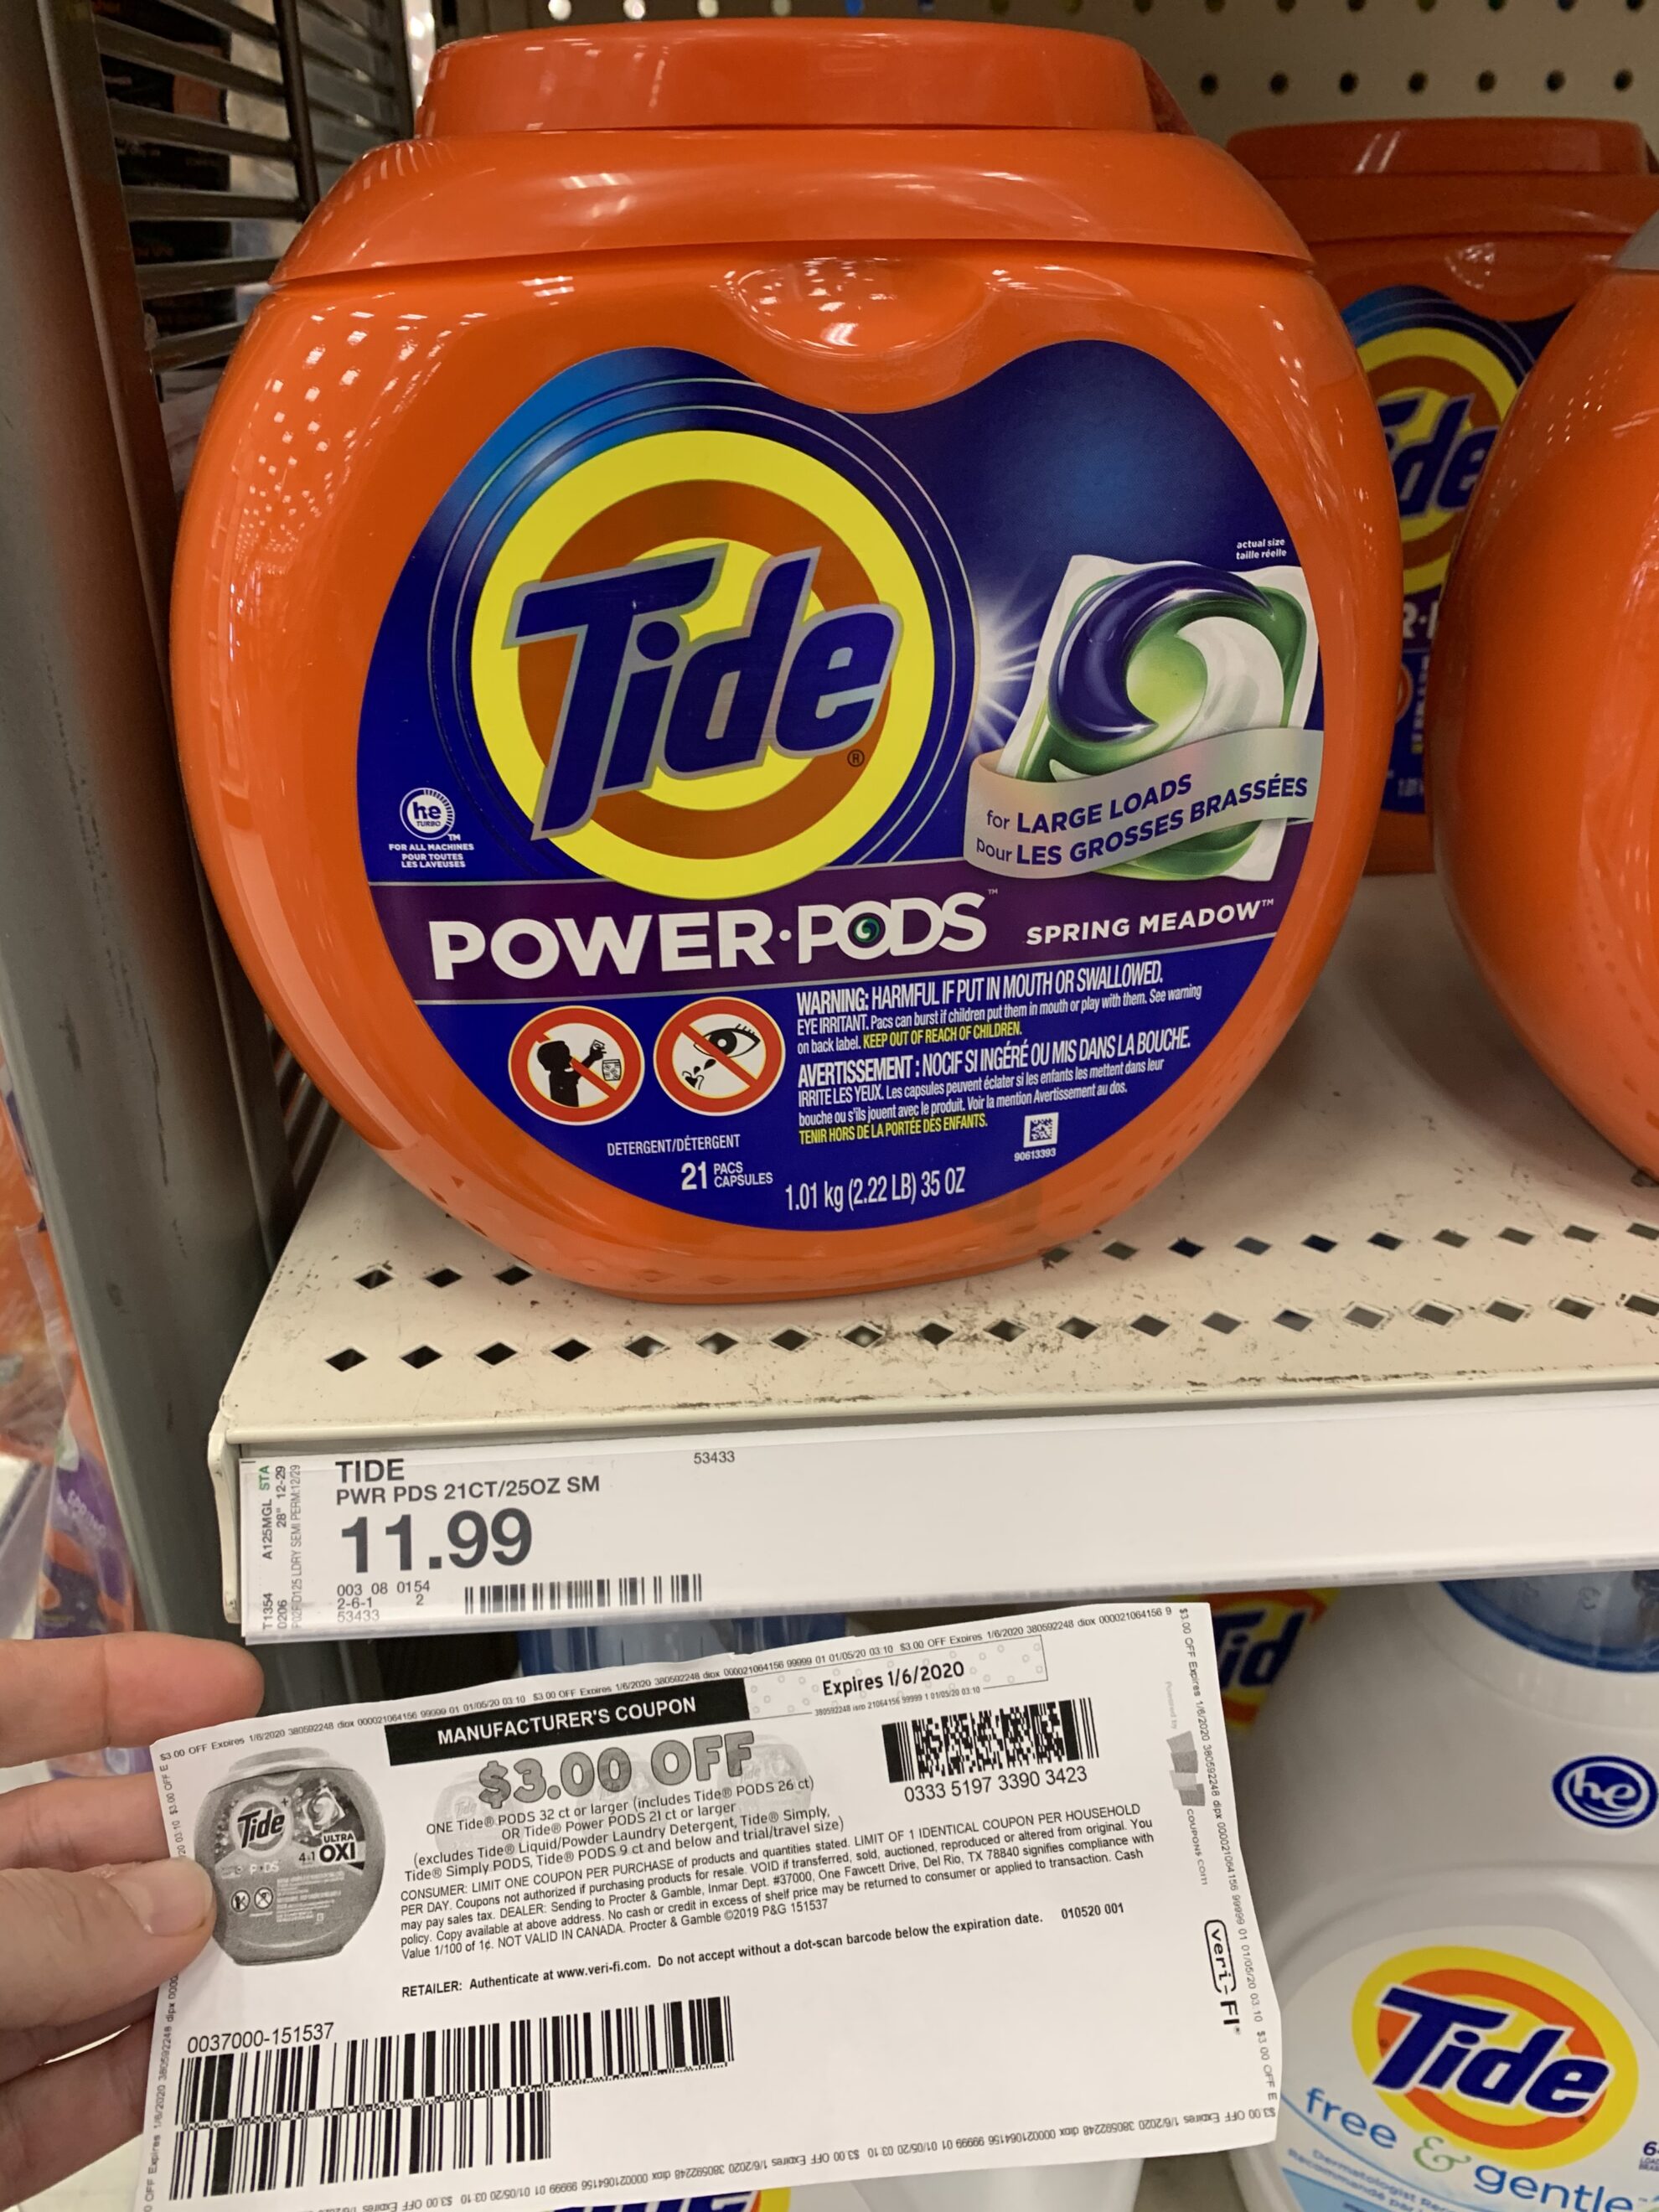 New 3/1 Tide Power PODS Coupon to Print 5 Dinners